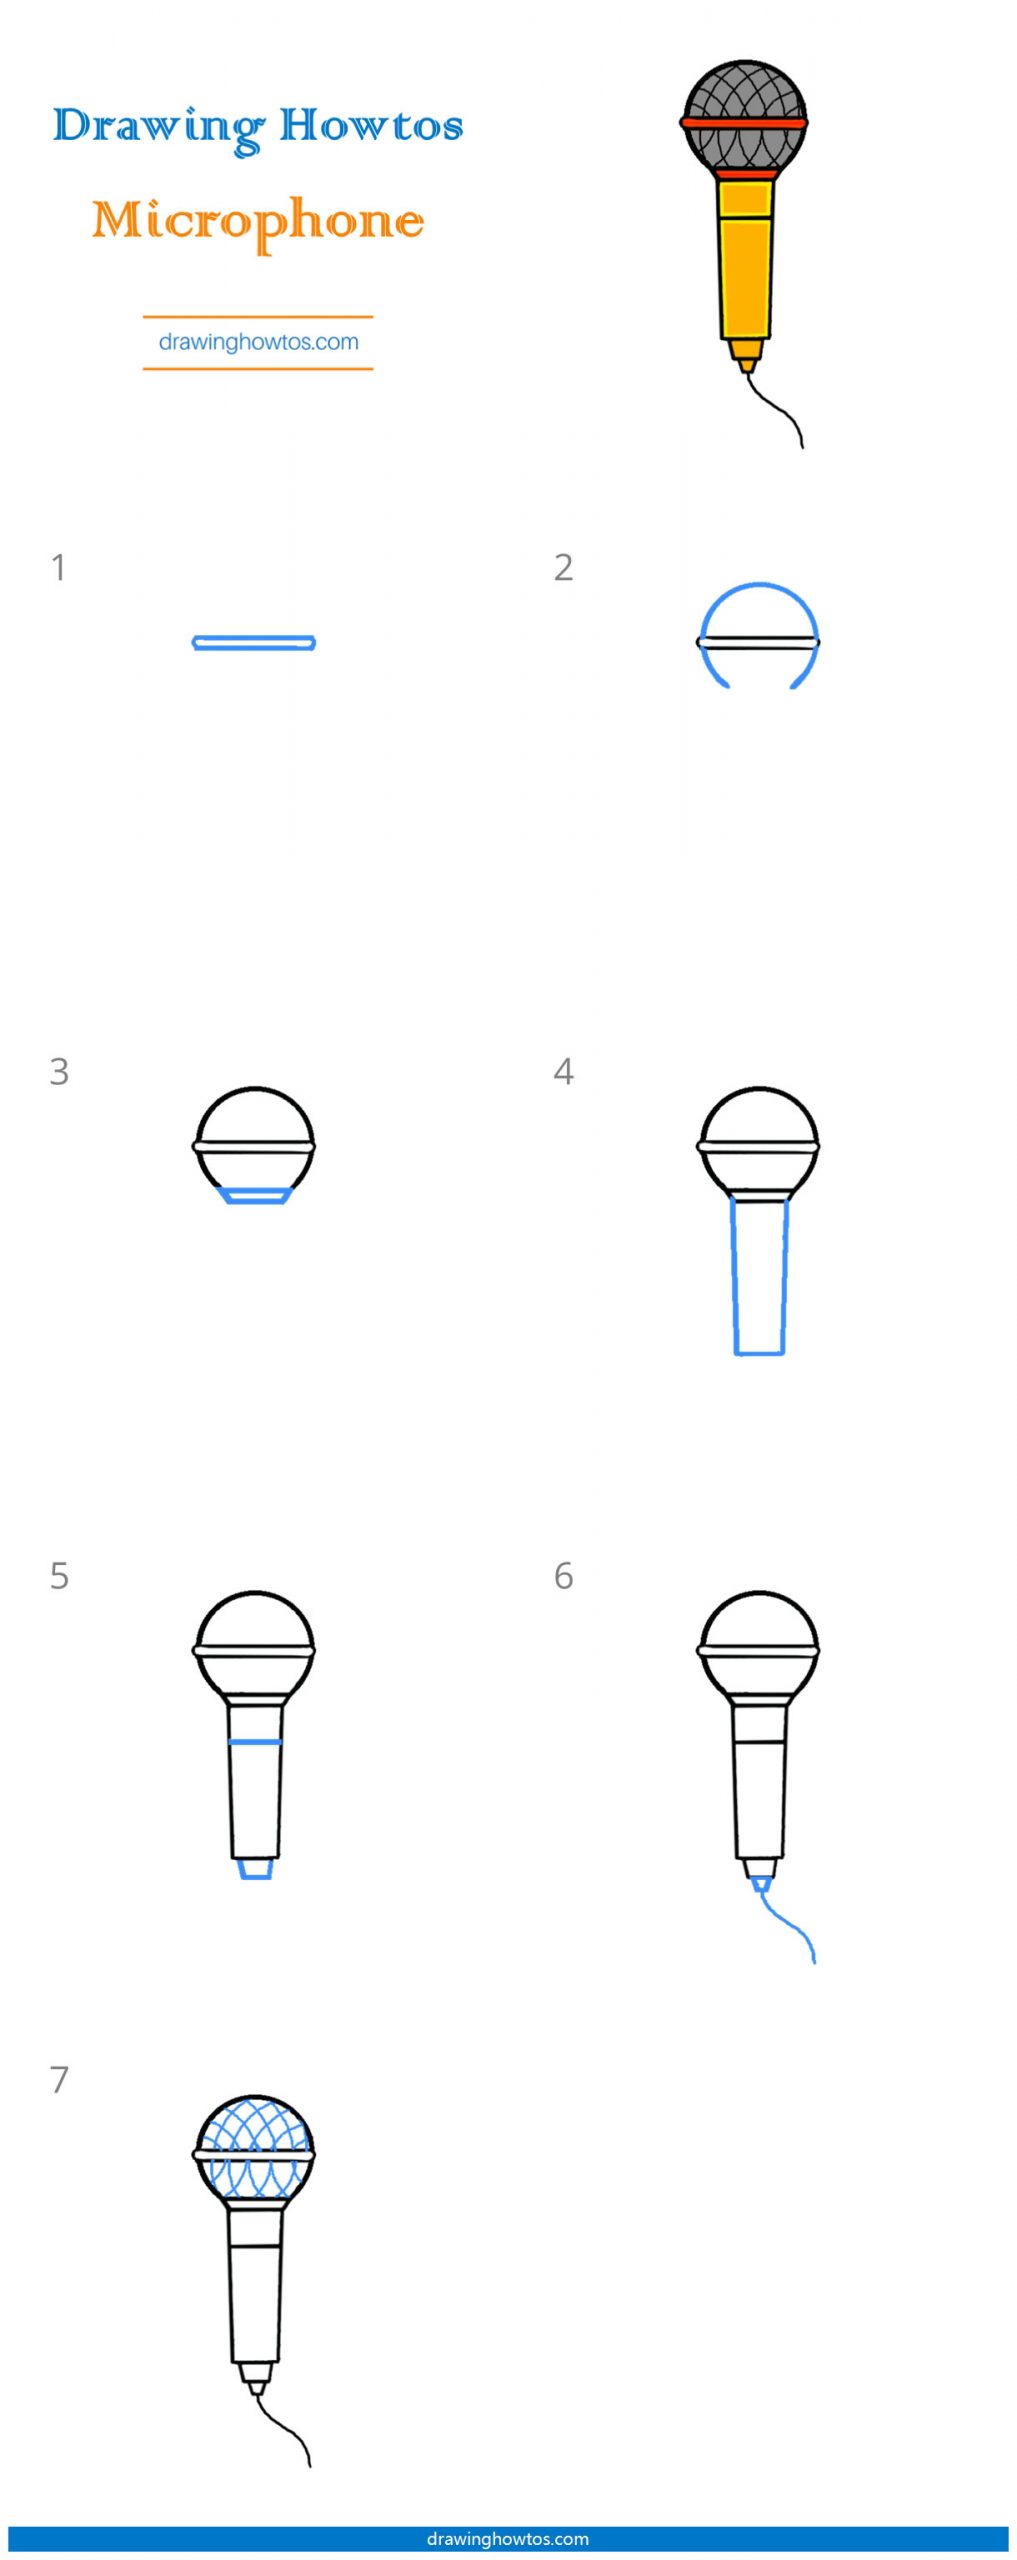 How to Draw a Microphone Step by Step